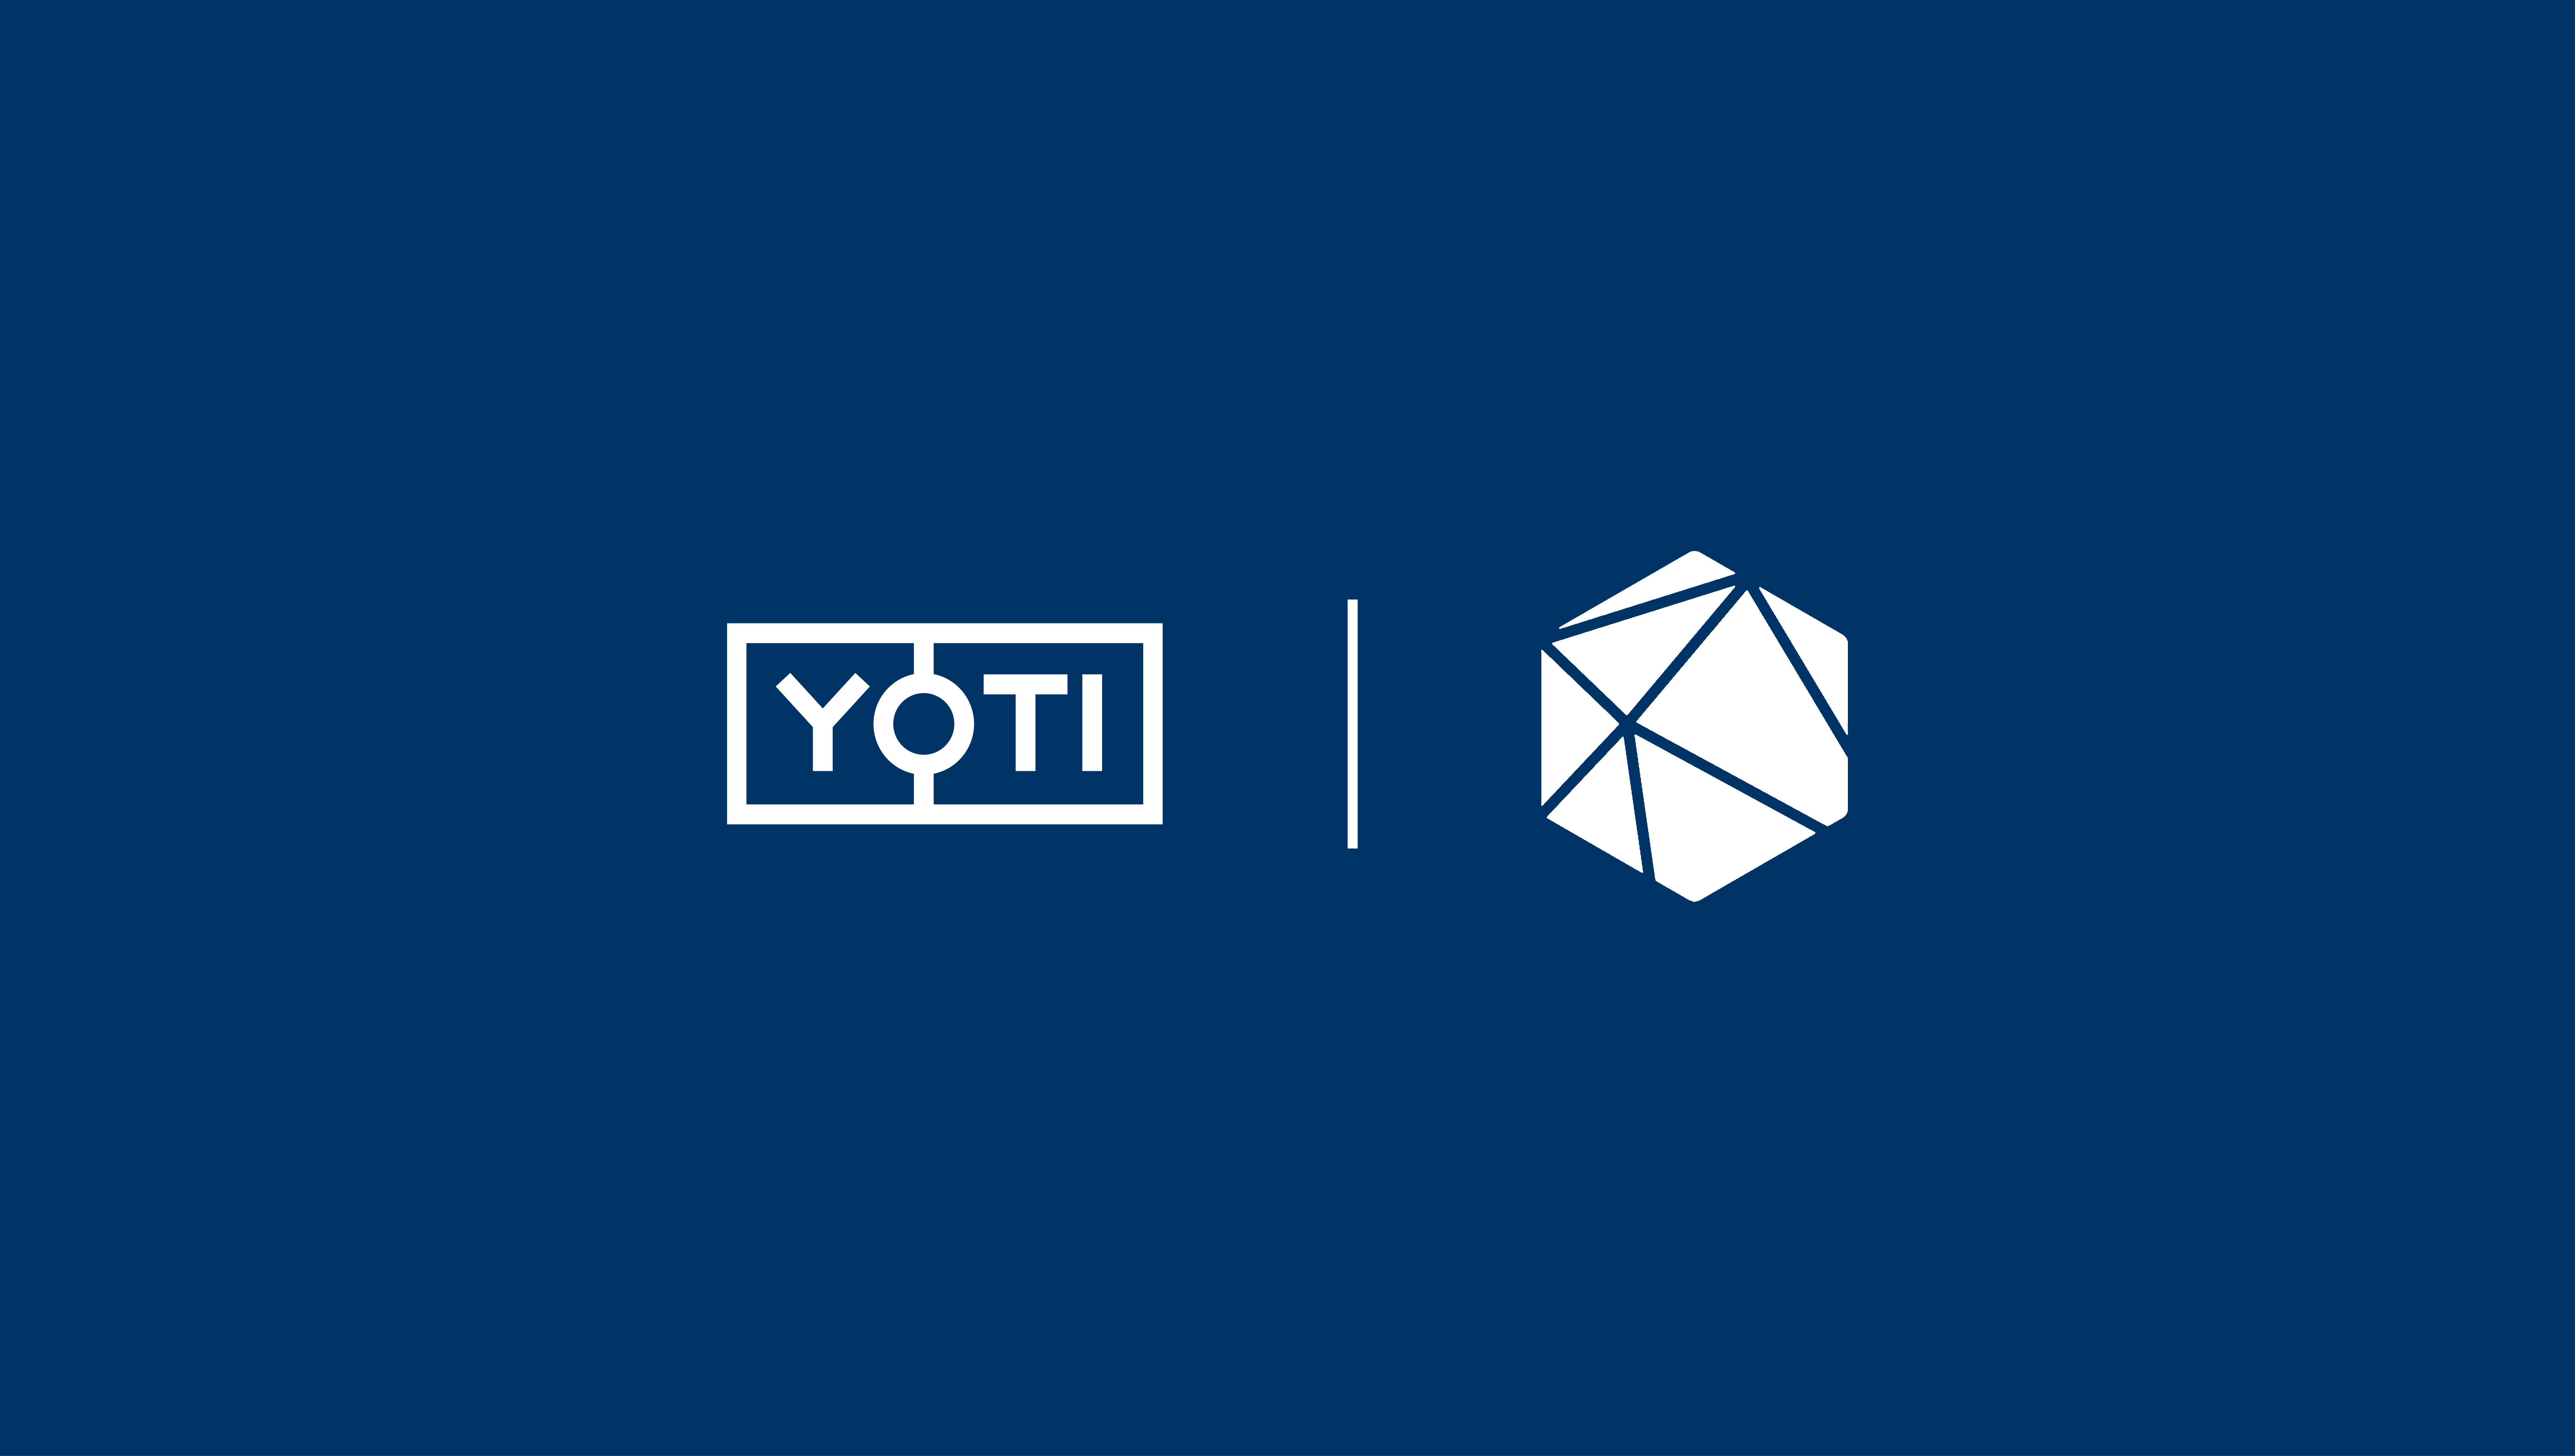 Yoti and Cryptograph logos presented together